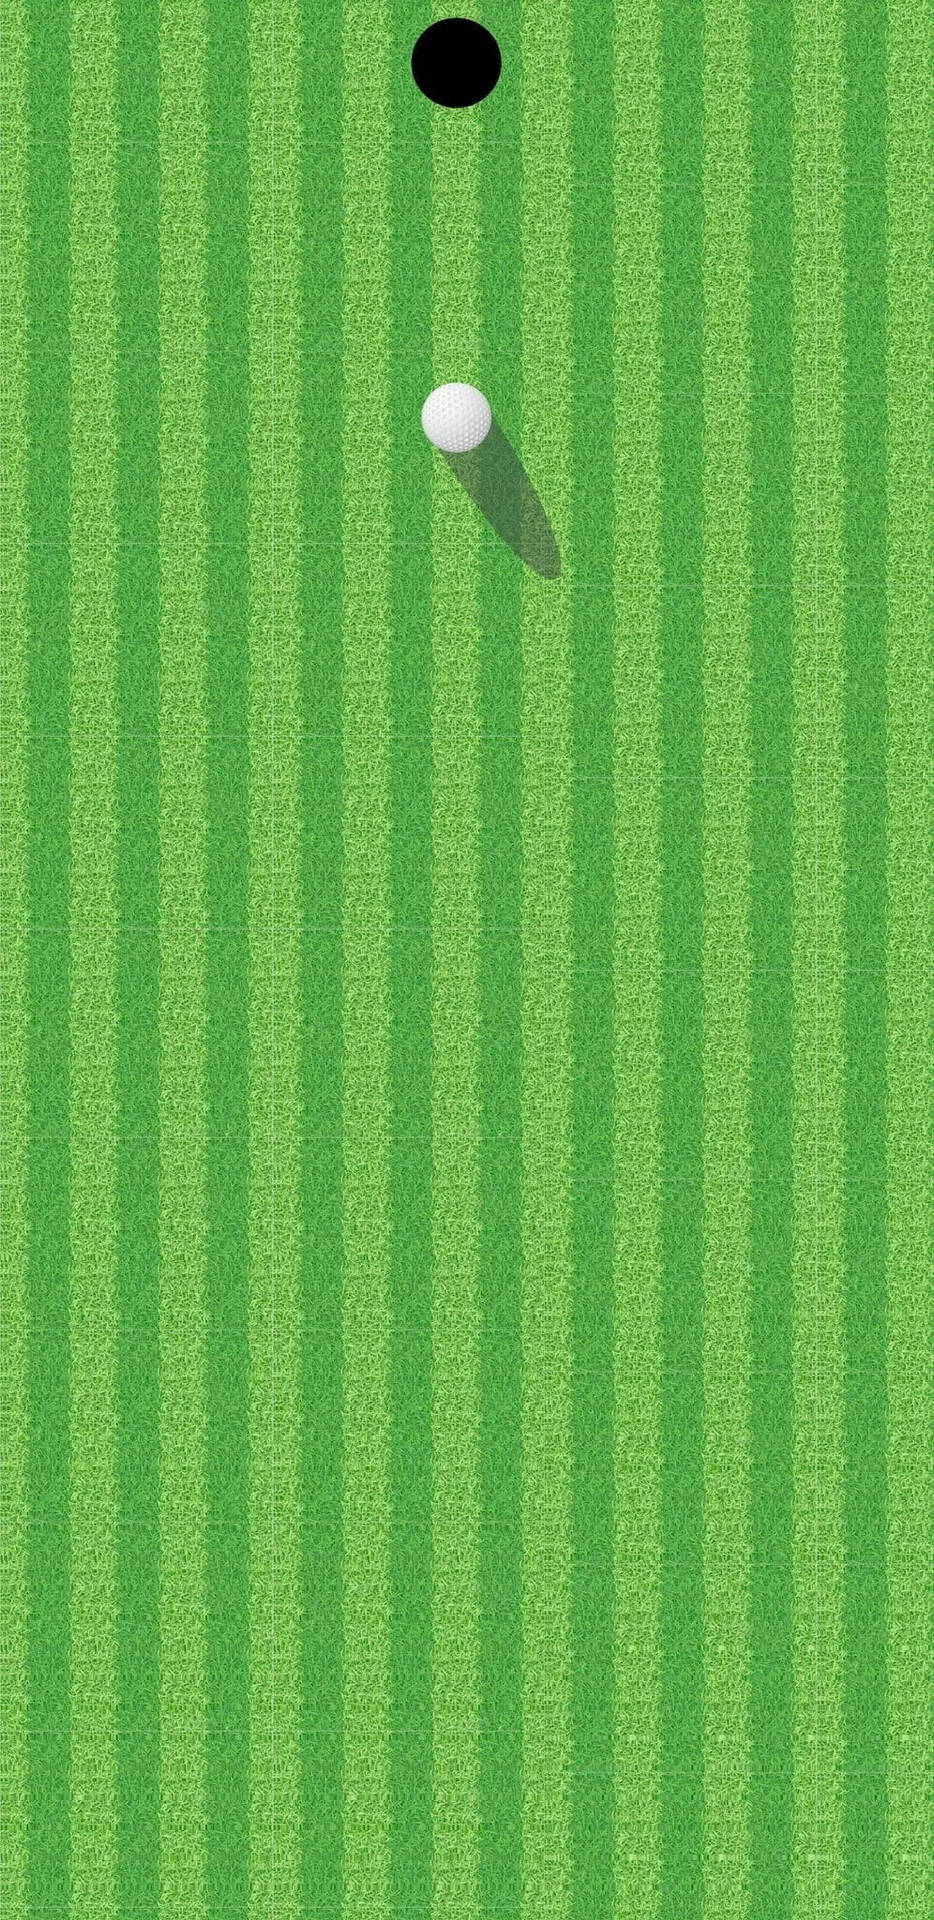 Golf Middle Punch Hole Wallpaper